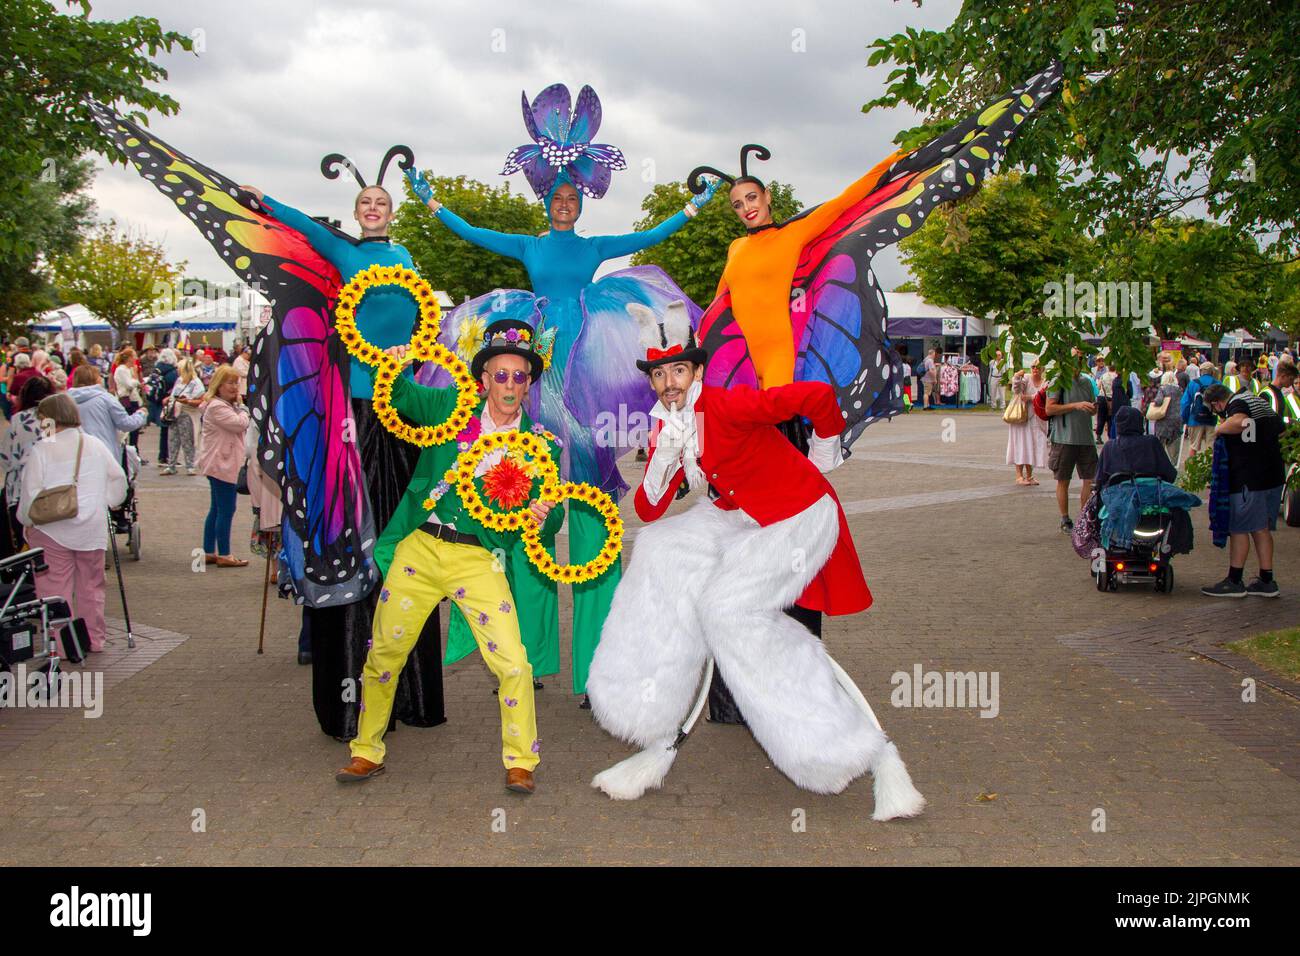 Southport Flower Show, Merseyside, UK. 17th Aug 2022:  Mr Flower, Greeters, promotion staff & entertainers at the largest independent flower show in England, which is expecting thousands of visitors over the four-day event as it opened today after a two-year Covid closure.  Credit: MediaWorld Images/Alamy Live News Stock Photo